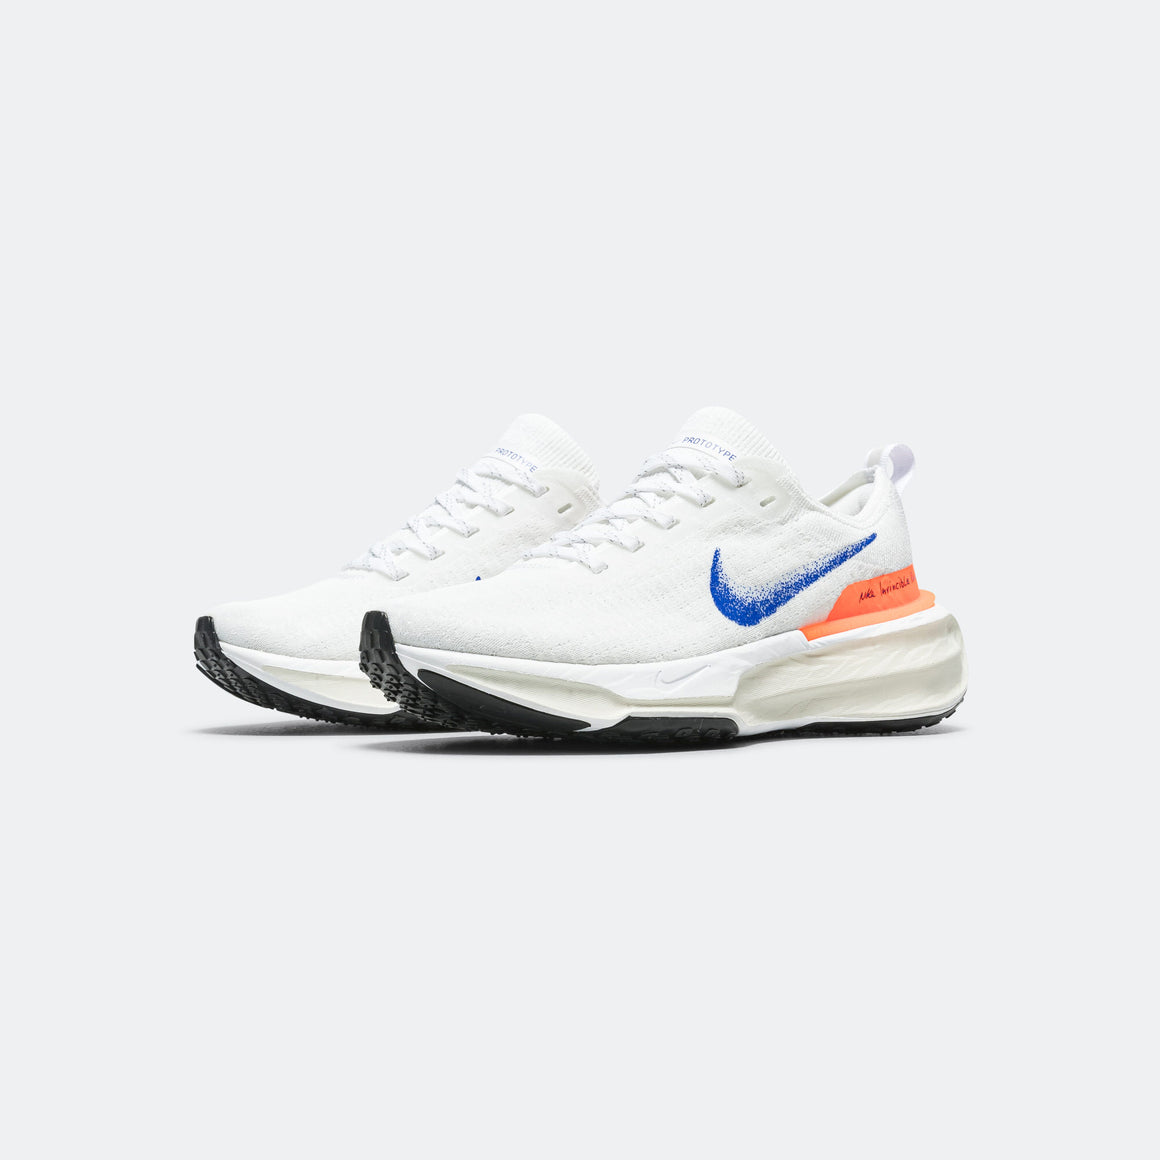 Nike - Mens ZoomX Invincible 3 'Blueprint' - White/Racer Blue-Total Orange - Up There Athletics